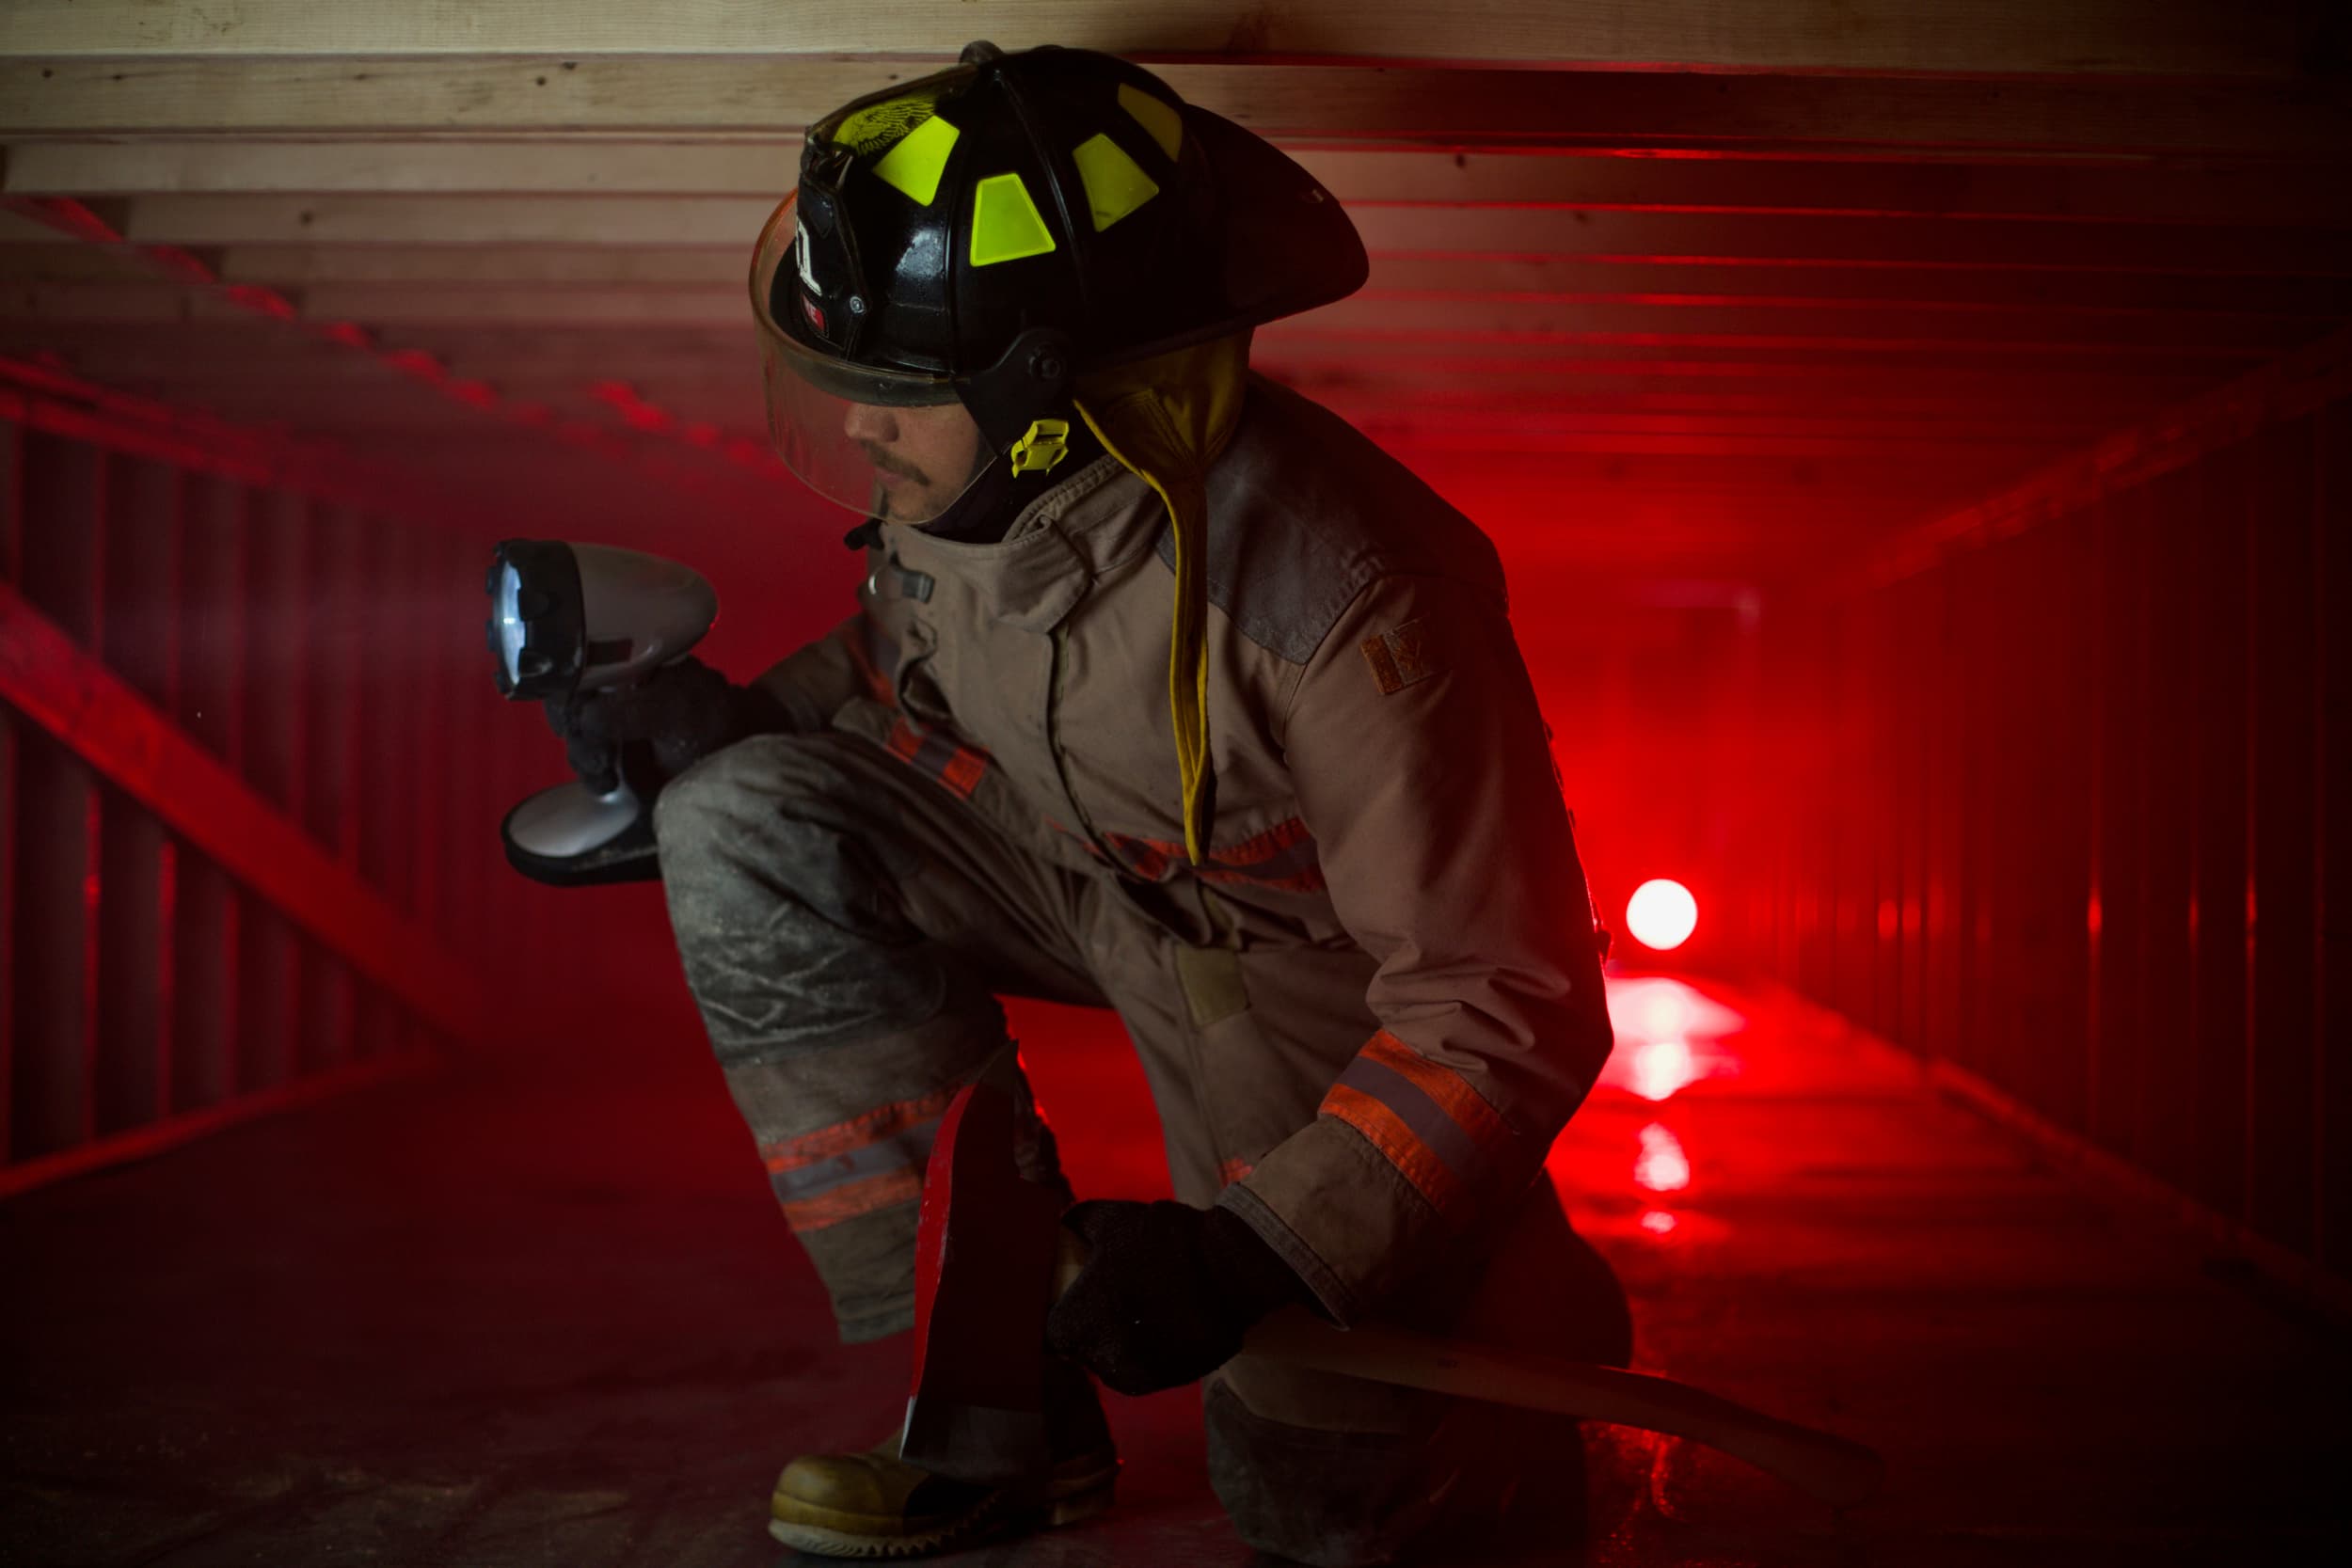 Compliance Training Online Firefighter Confined Space Entry & Rescue